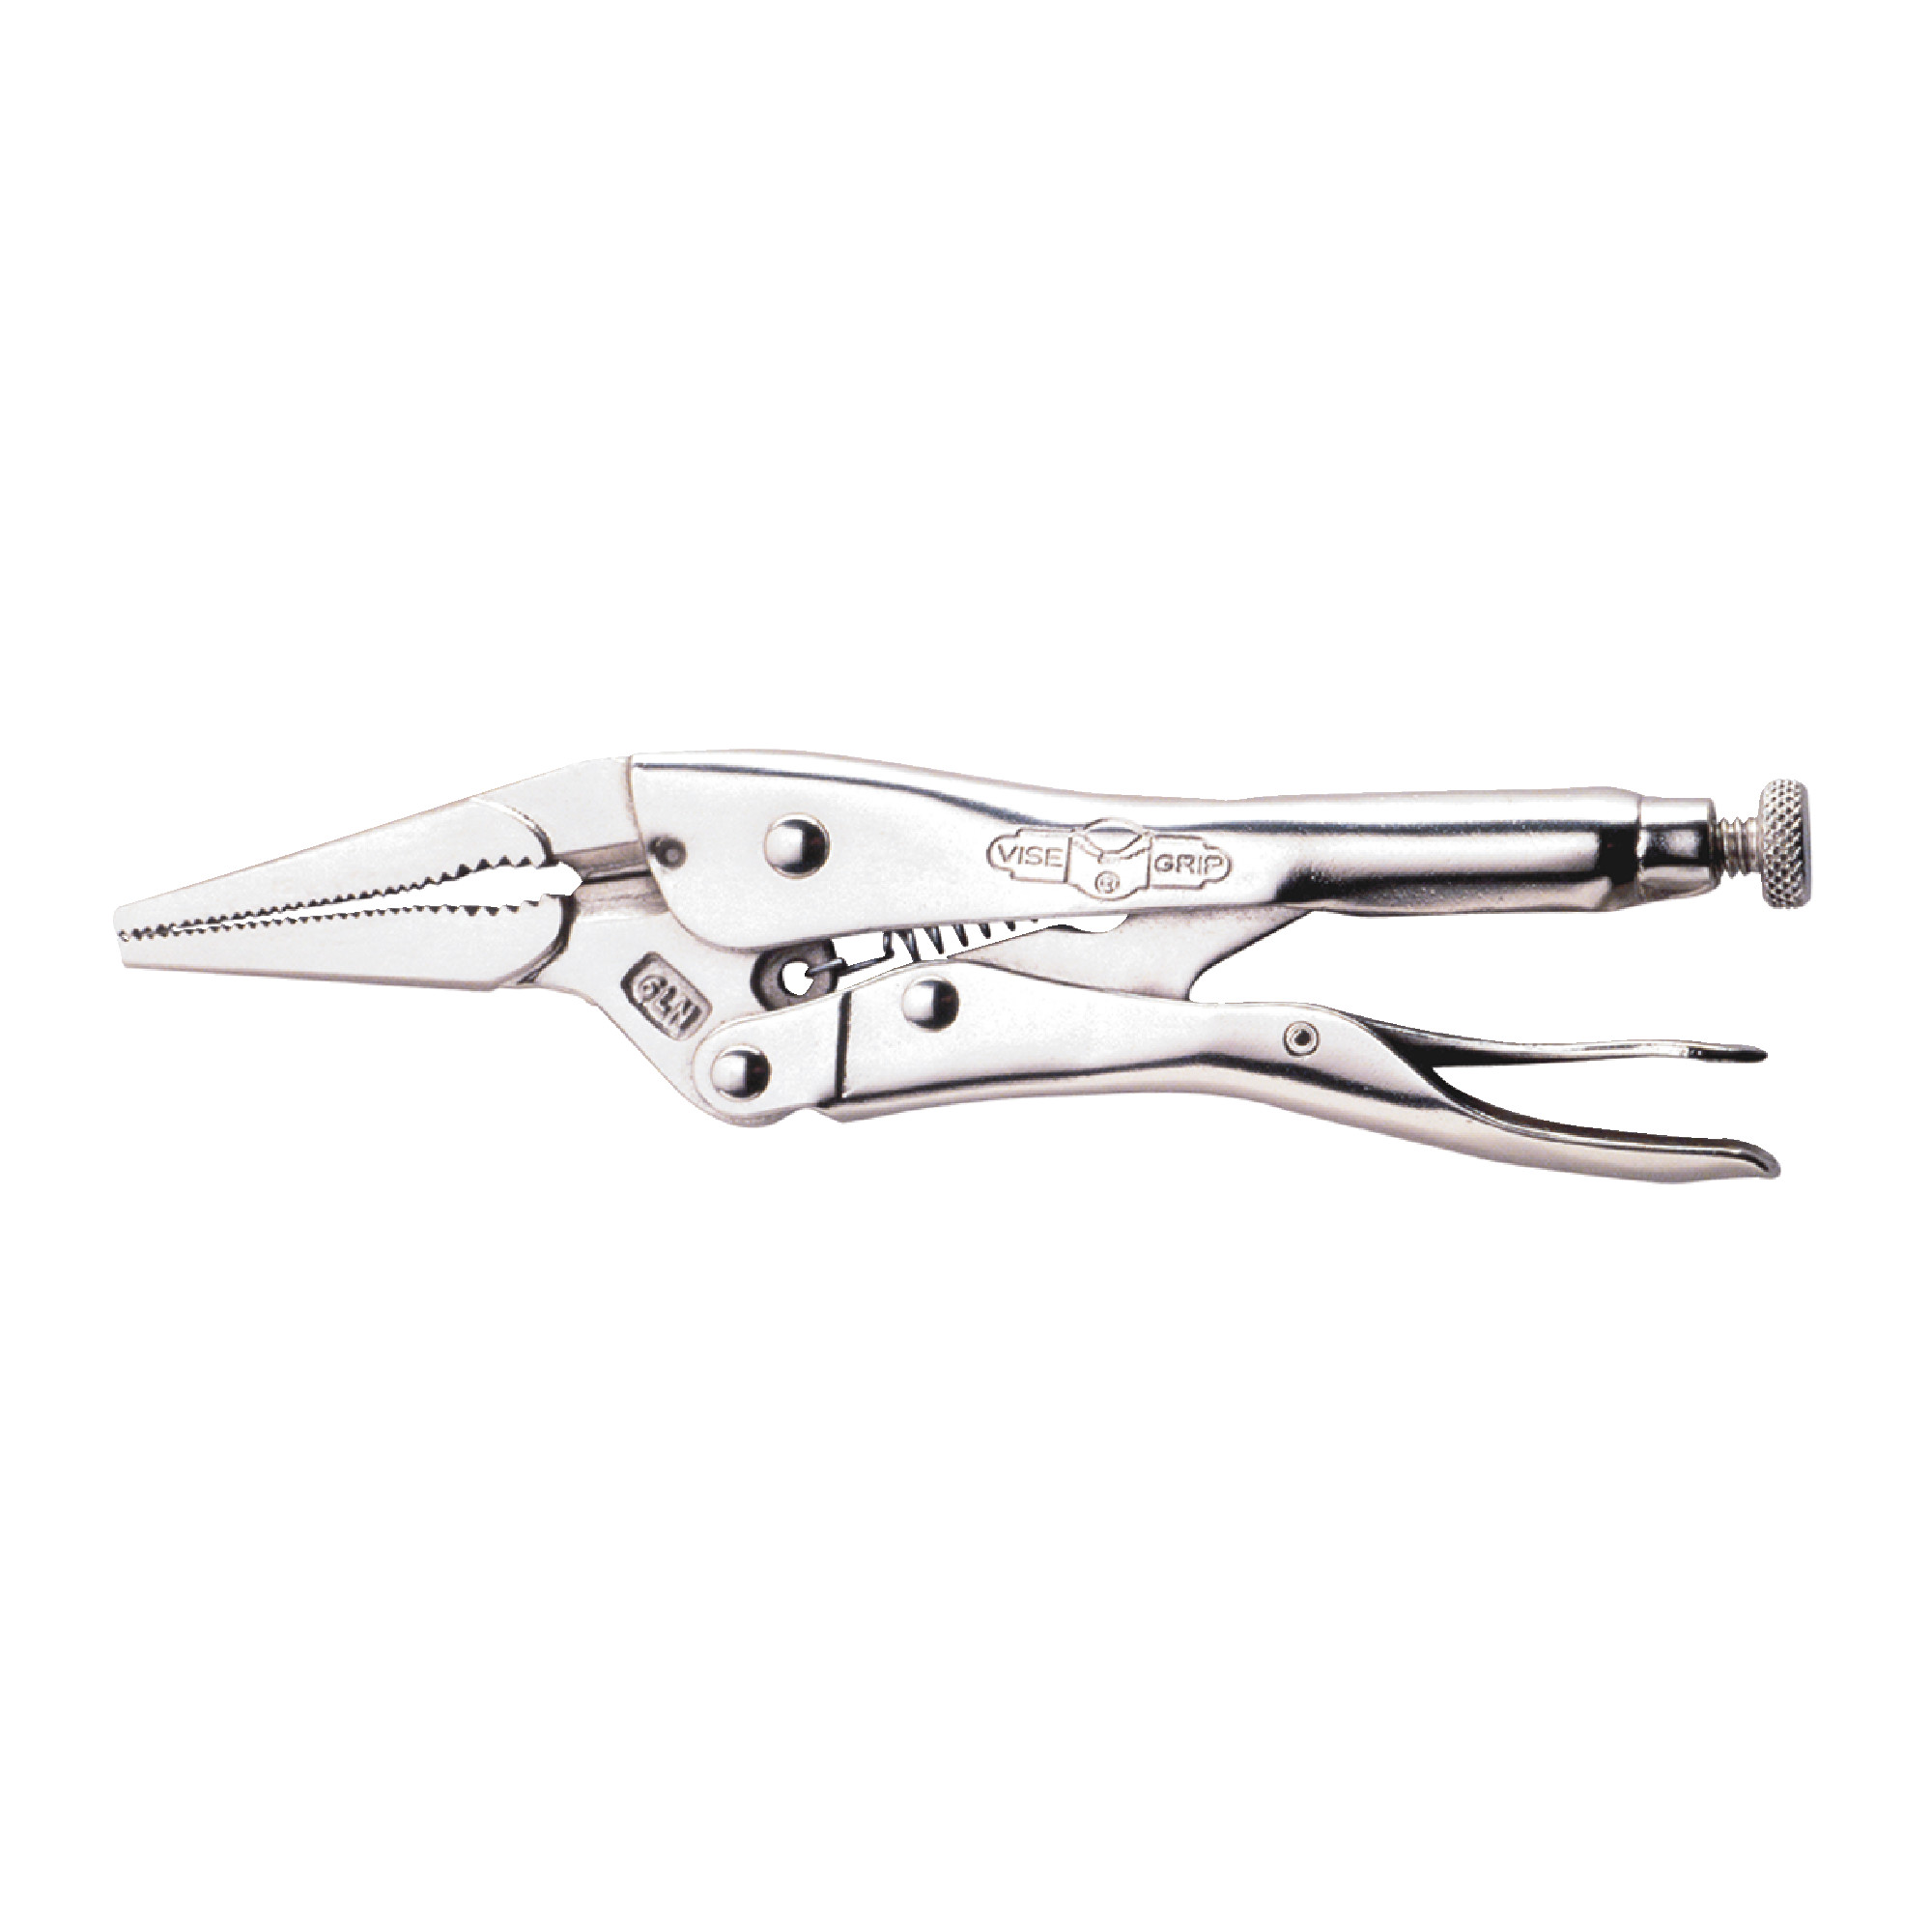 Locking Pliers With Wire Cutter